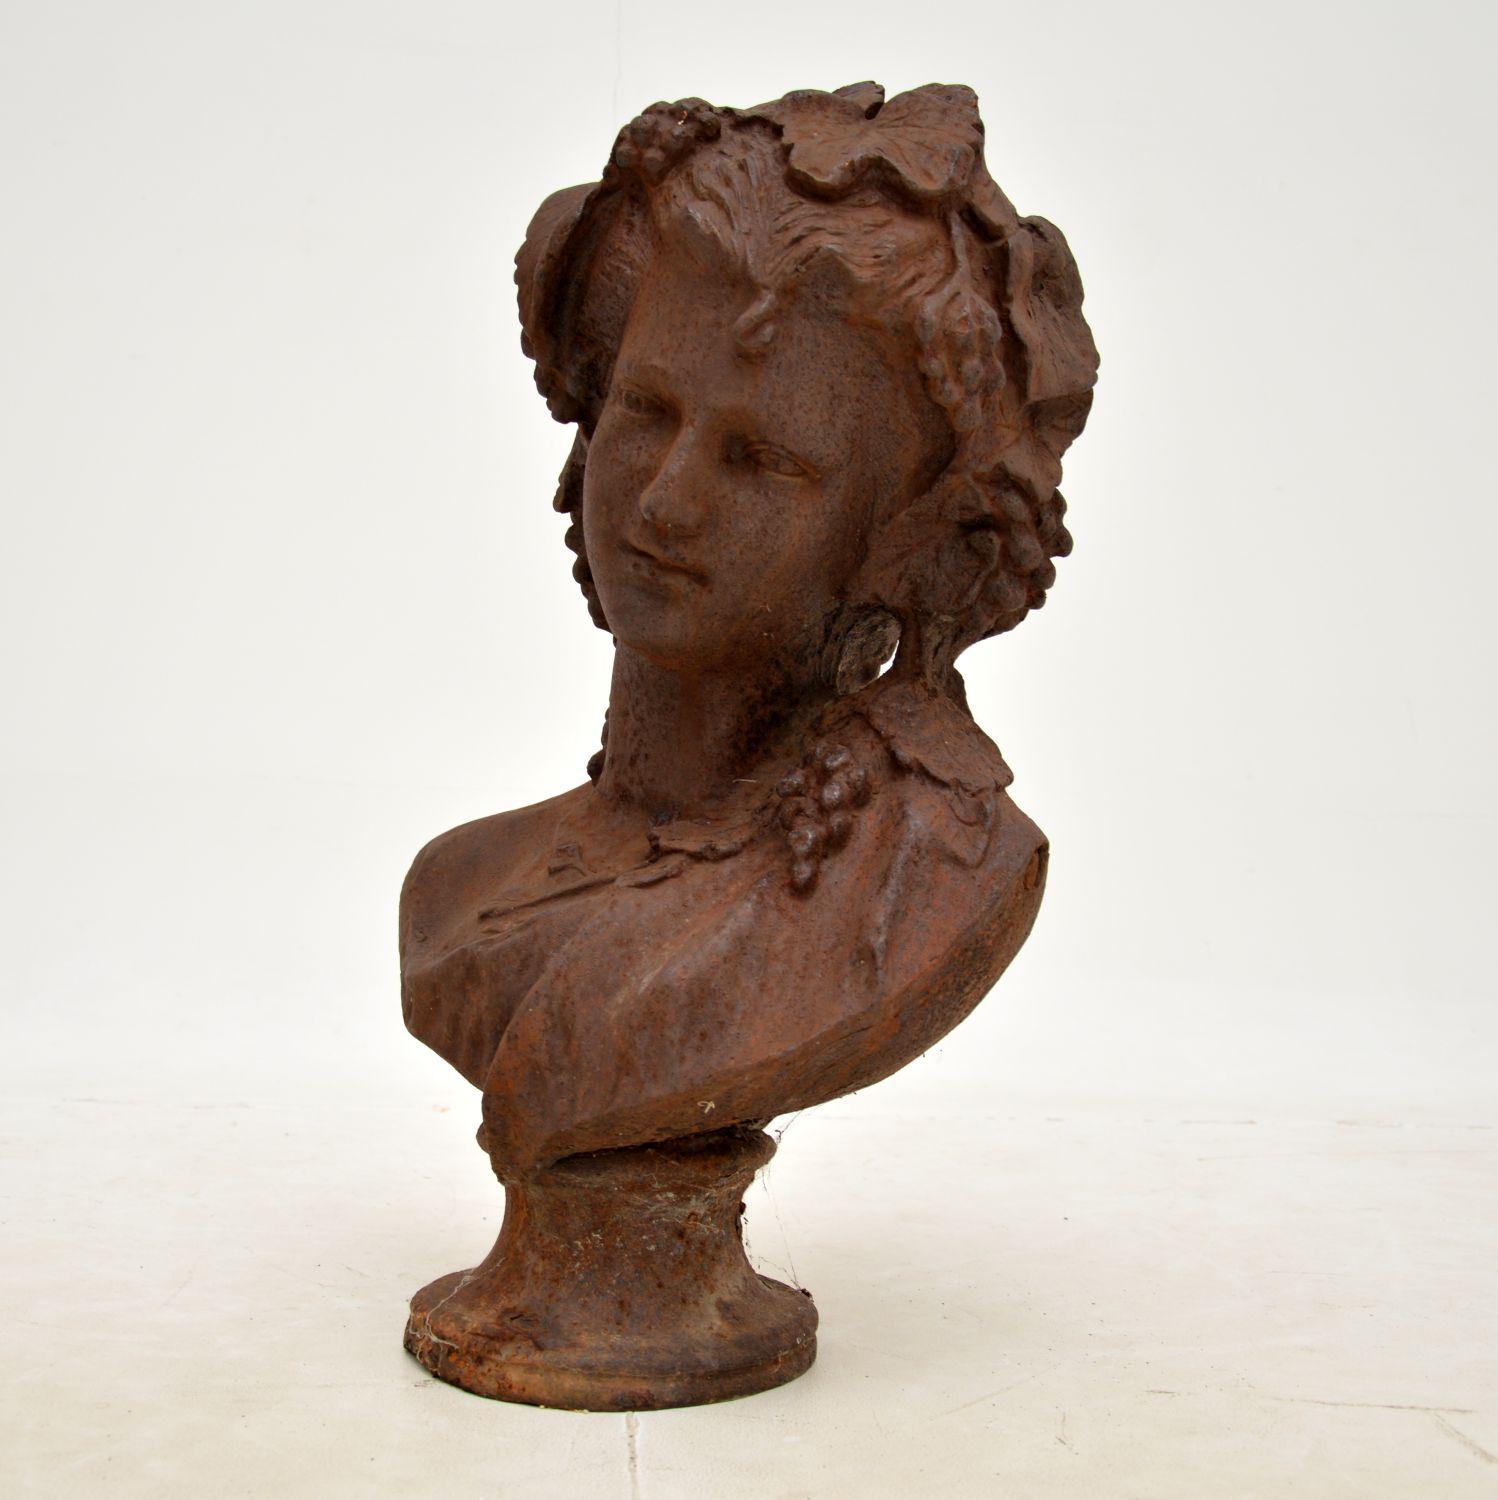 A charming and beautiful antique cast iron bust depicting a young woman with grapes in her hair. This was made in England, its hard to date exactly but we would say it is from around the 1900-1910 period.

It is of amazing quality with beautiful